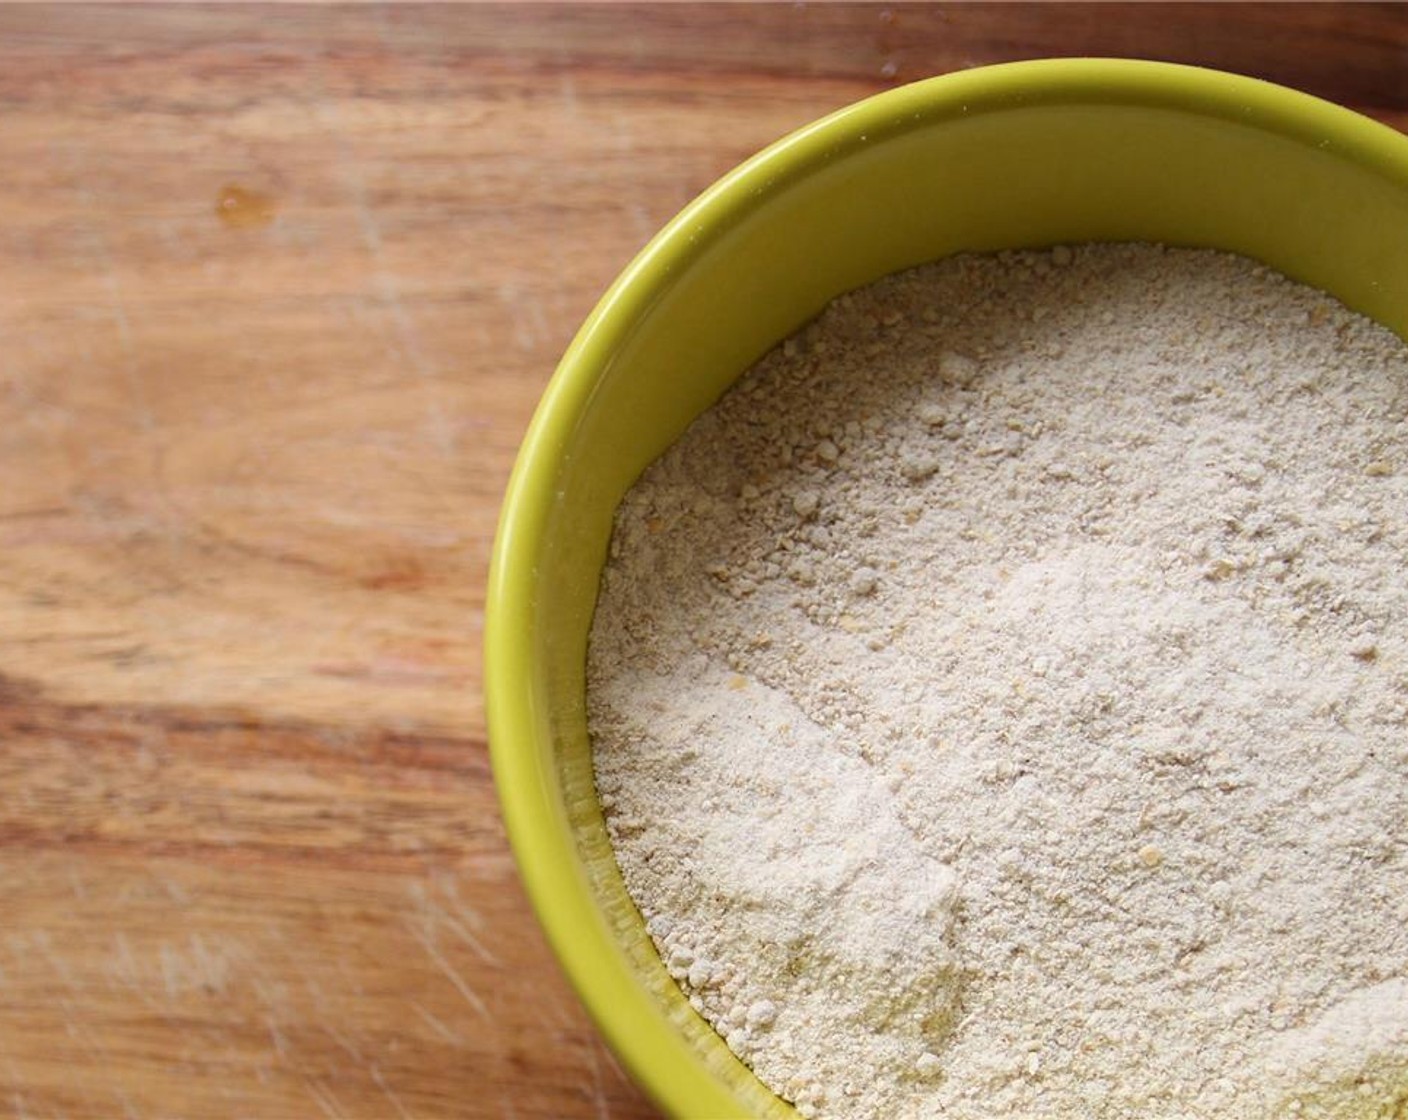 step 3 Combine the Almond Meal (3 Tbsp), Oat Flour (1/2 cup), Sweet Glutinous Rice Flour (1/2 cup), Pure Cane Sugar (3/4 cup), Baking Powder (1 tsp), Ground Cinnamon (1 tsp) and Salt (1/2 tsp) in a large bowl, mixing well.